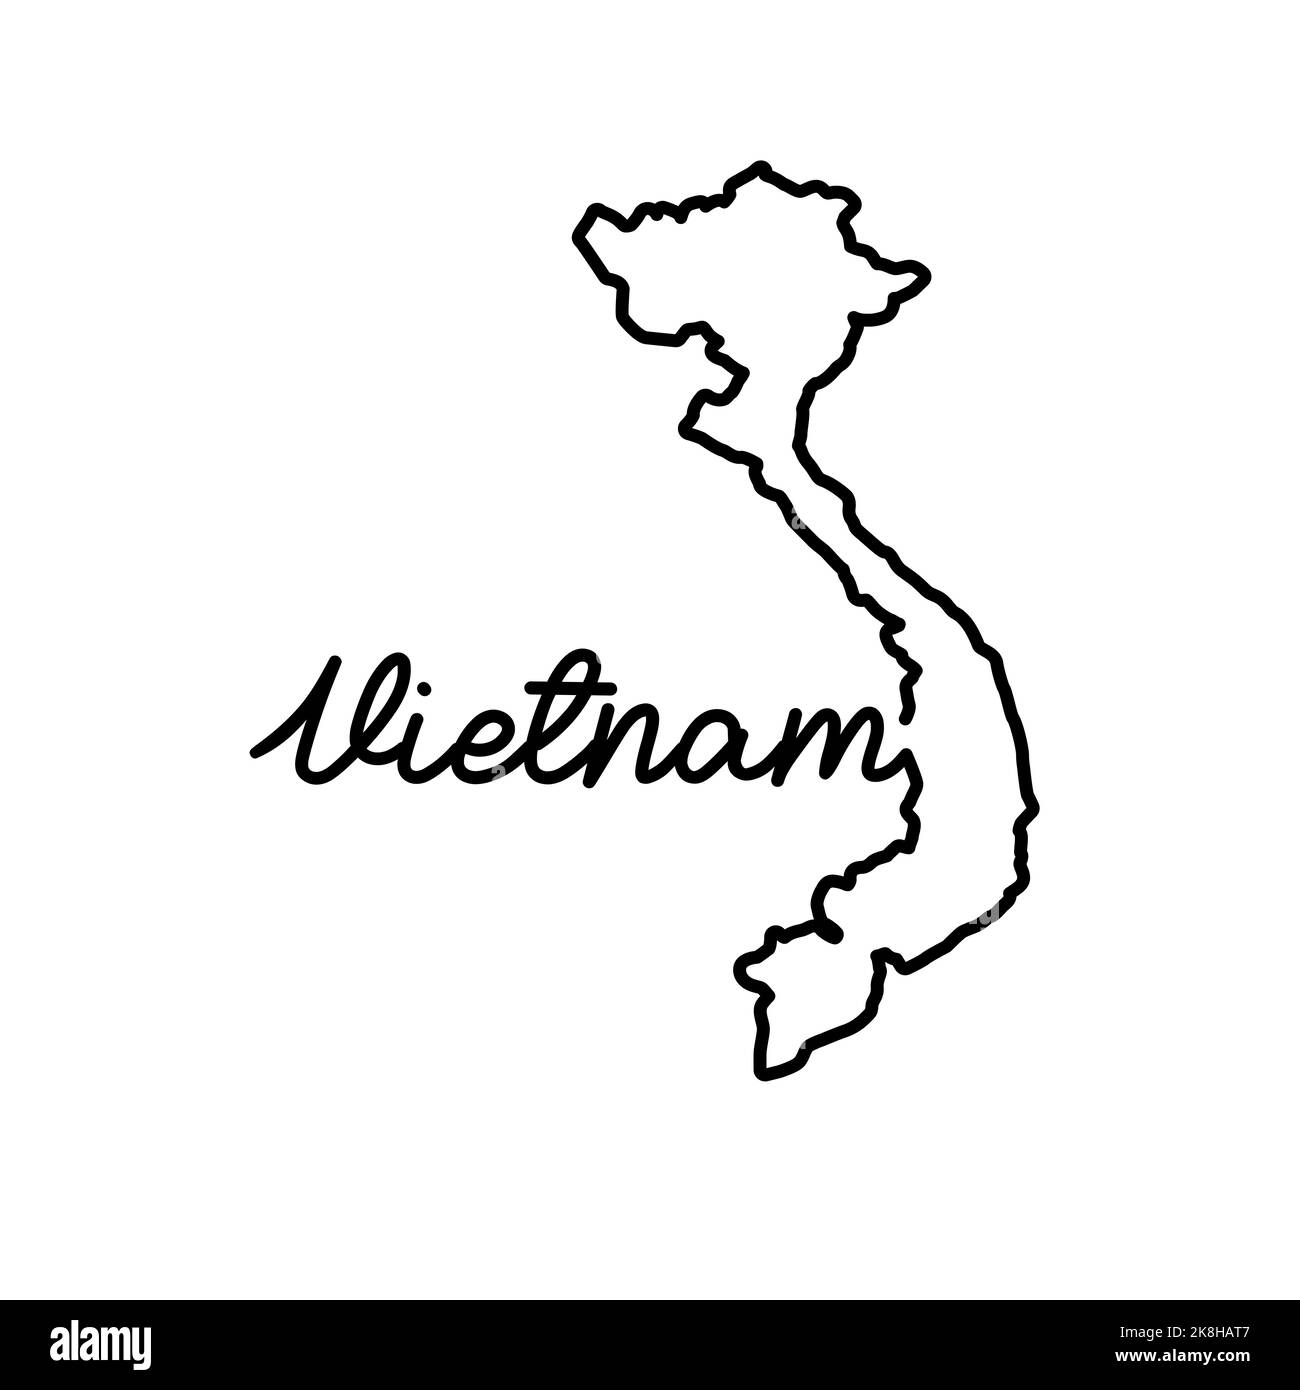 Vietnam outline map with the handwritten country name. Continuous line drawing of patriotic home sign. A love for a small homeland. T-shirt print idea Stock Photo